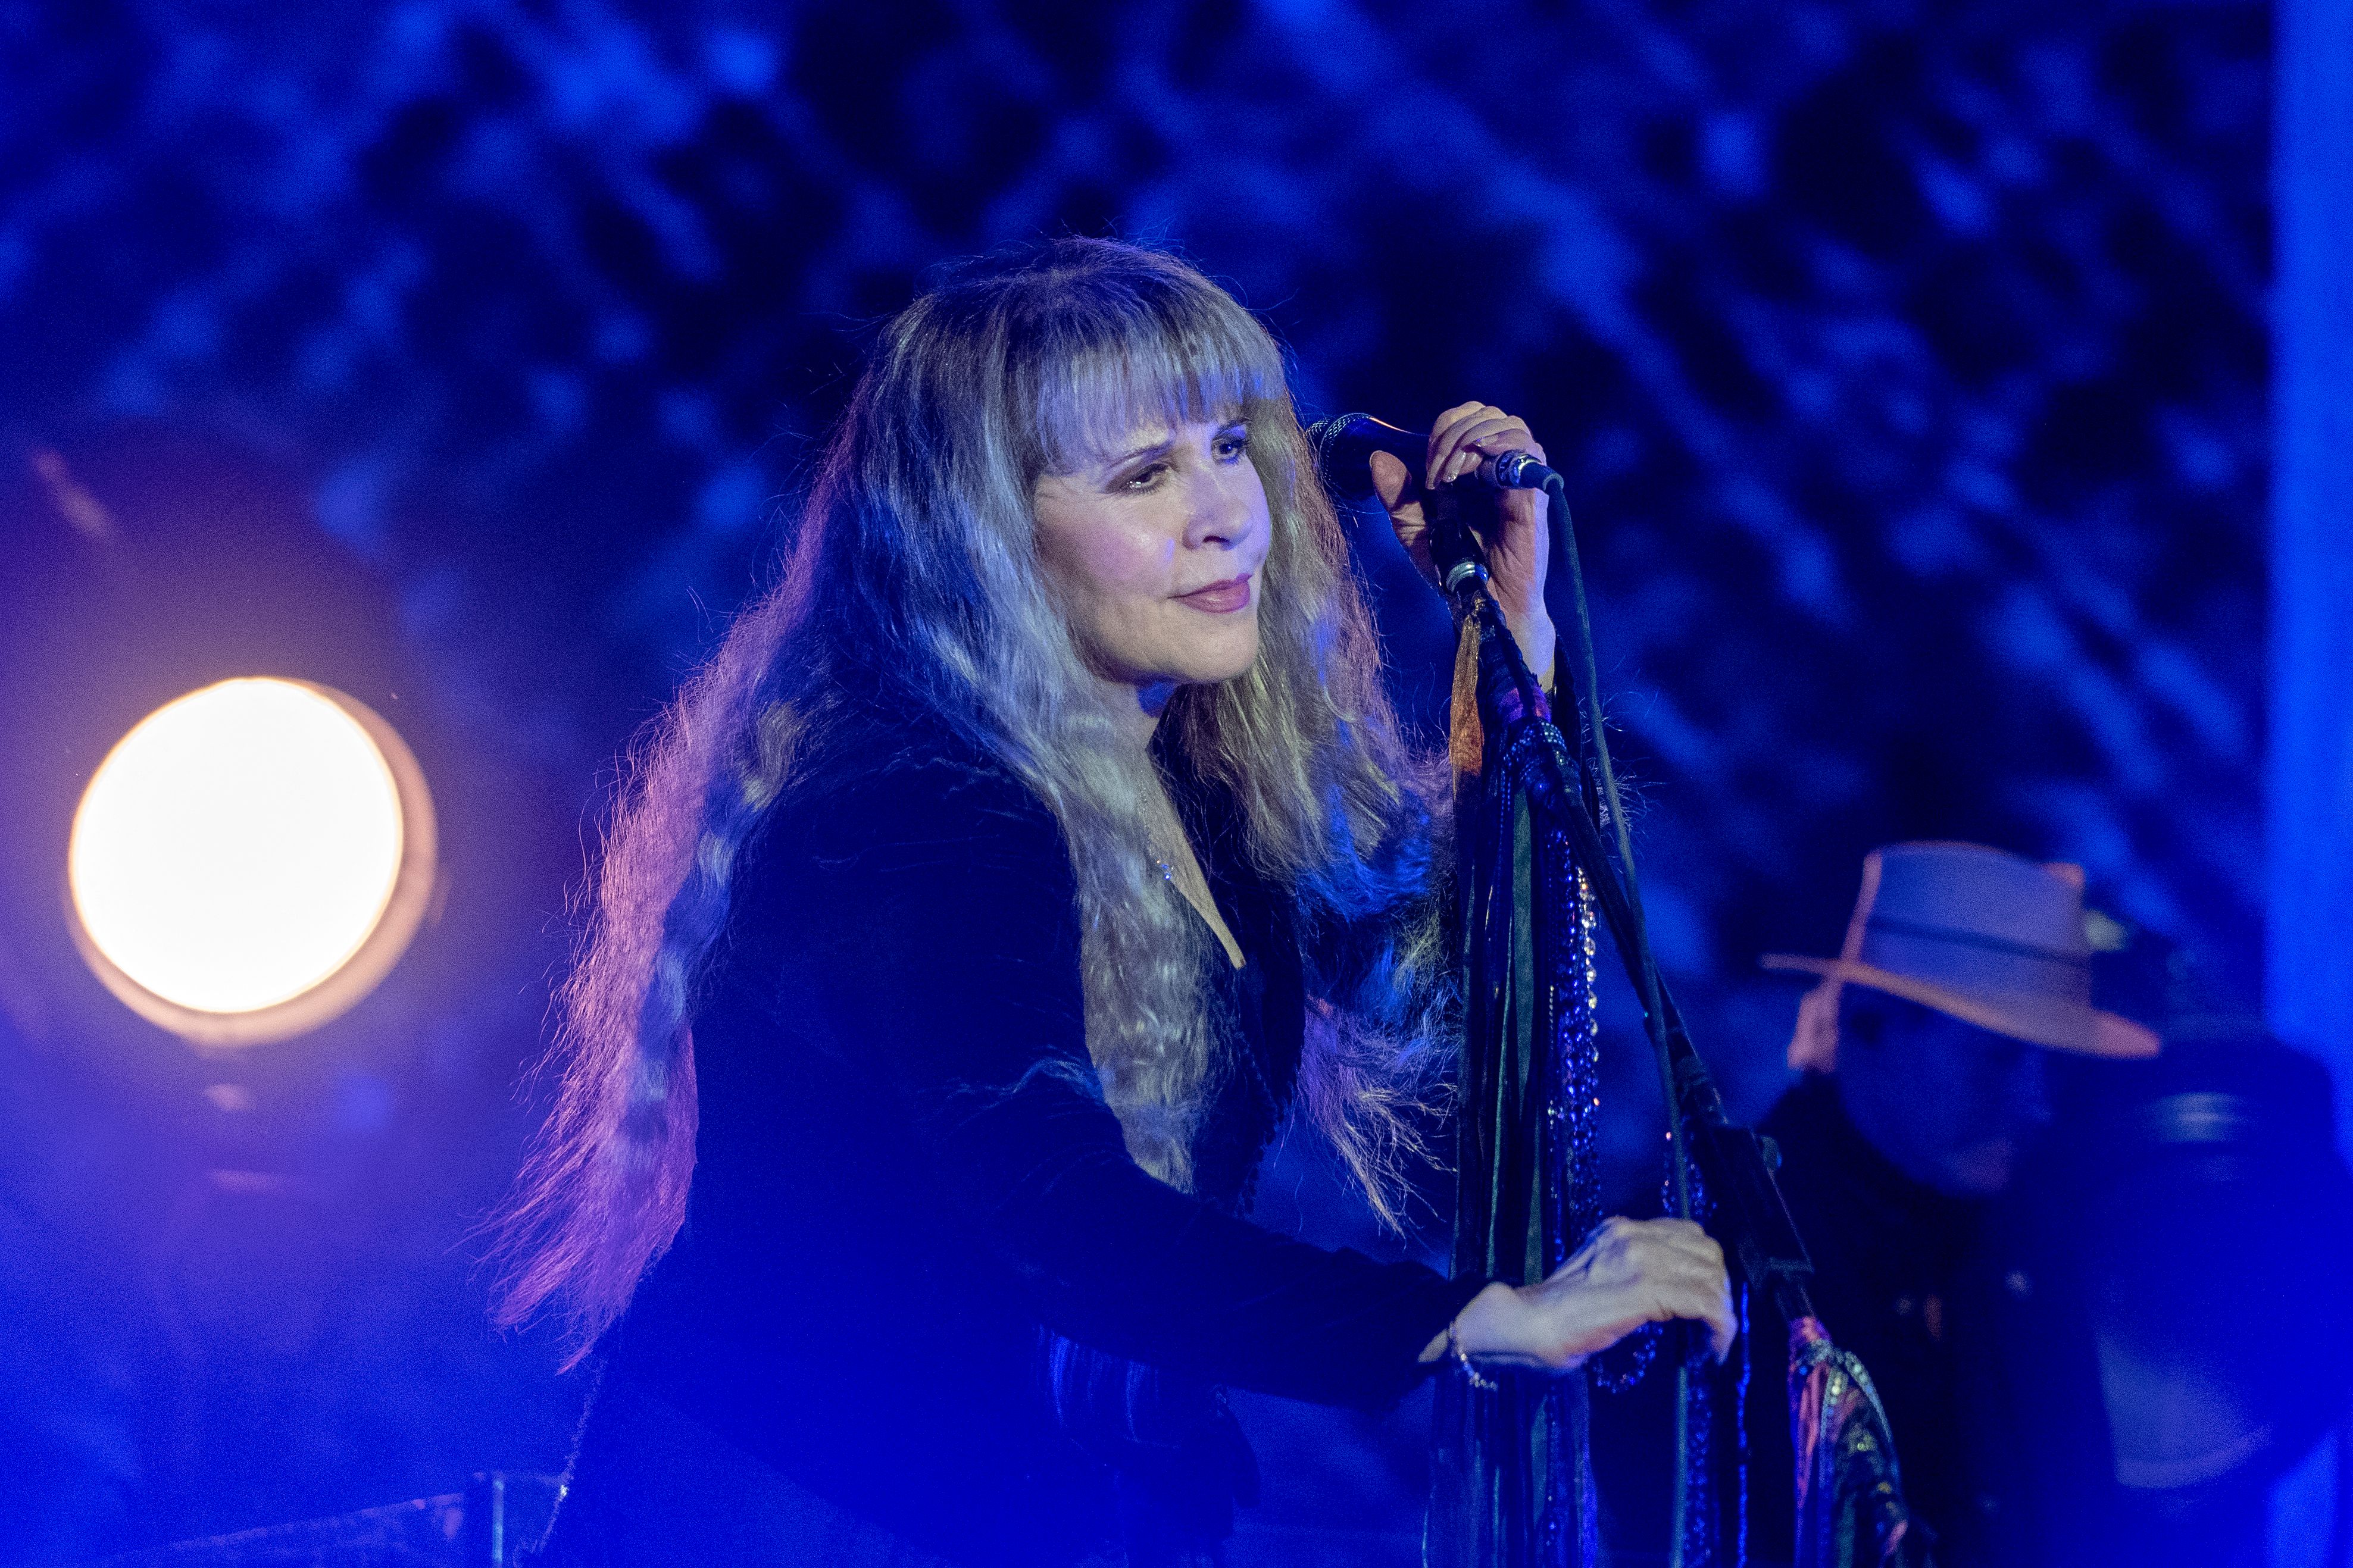 Stevie Nicks performs during day 4 of the Bonnaroo Music and Arts Festival